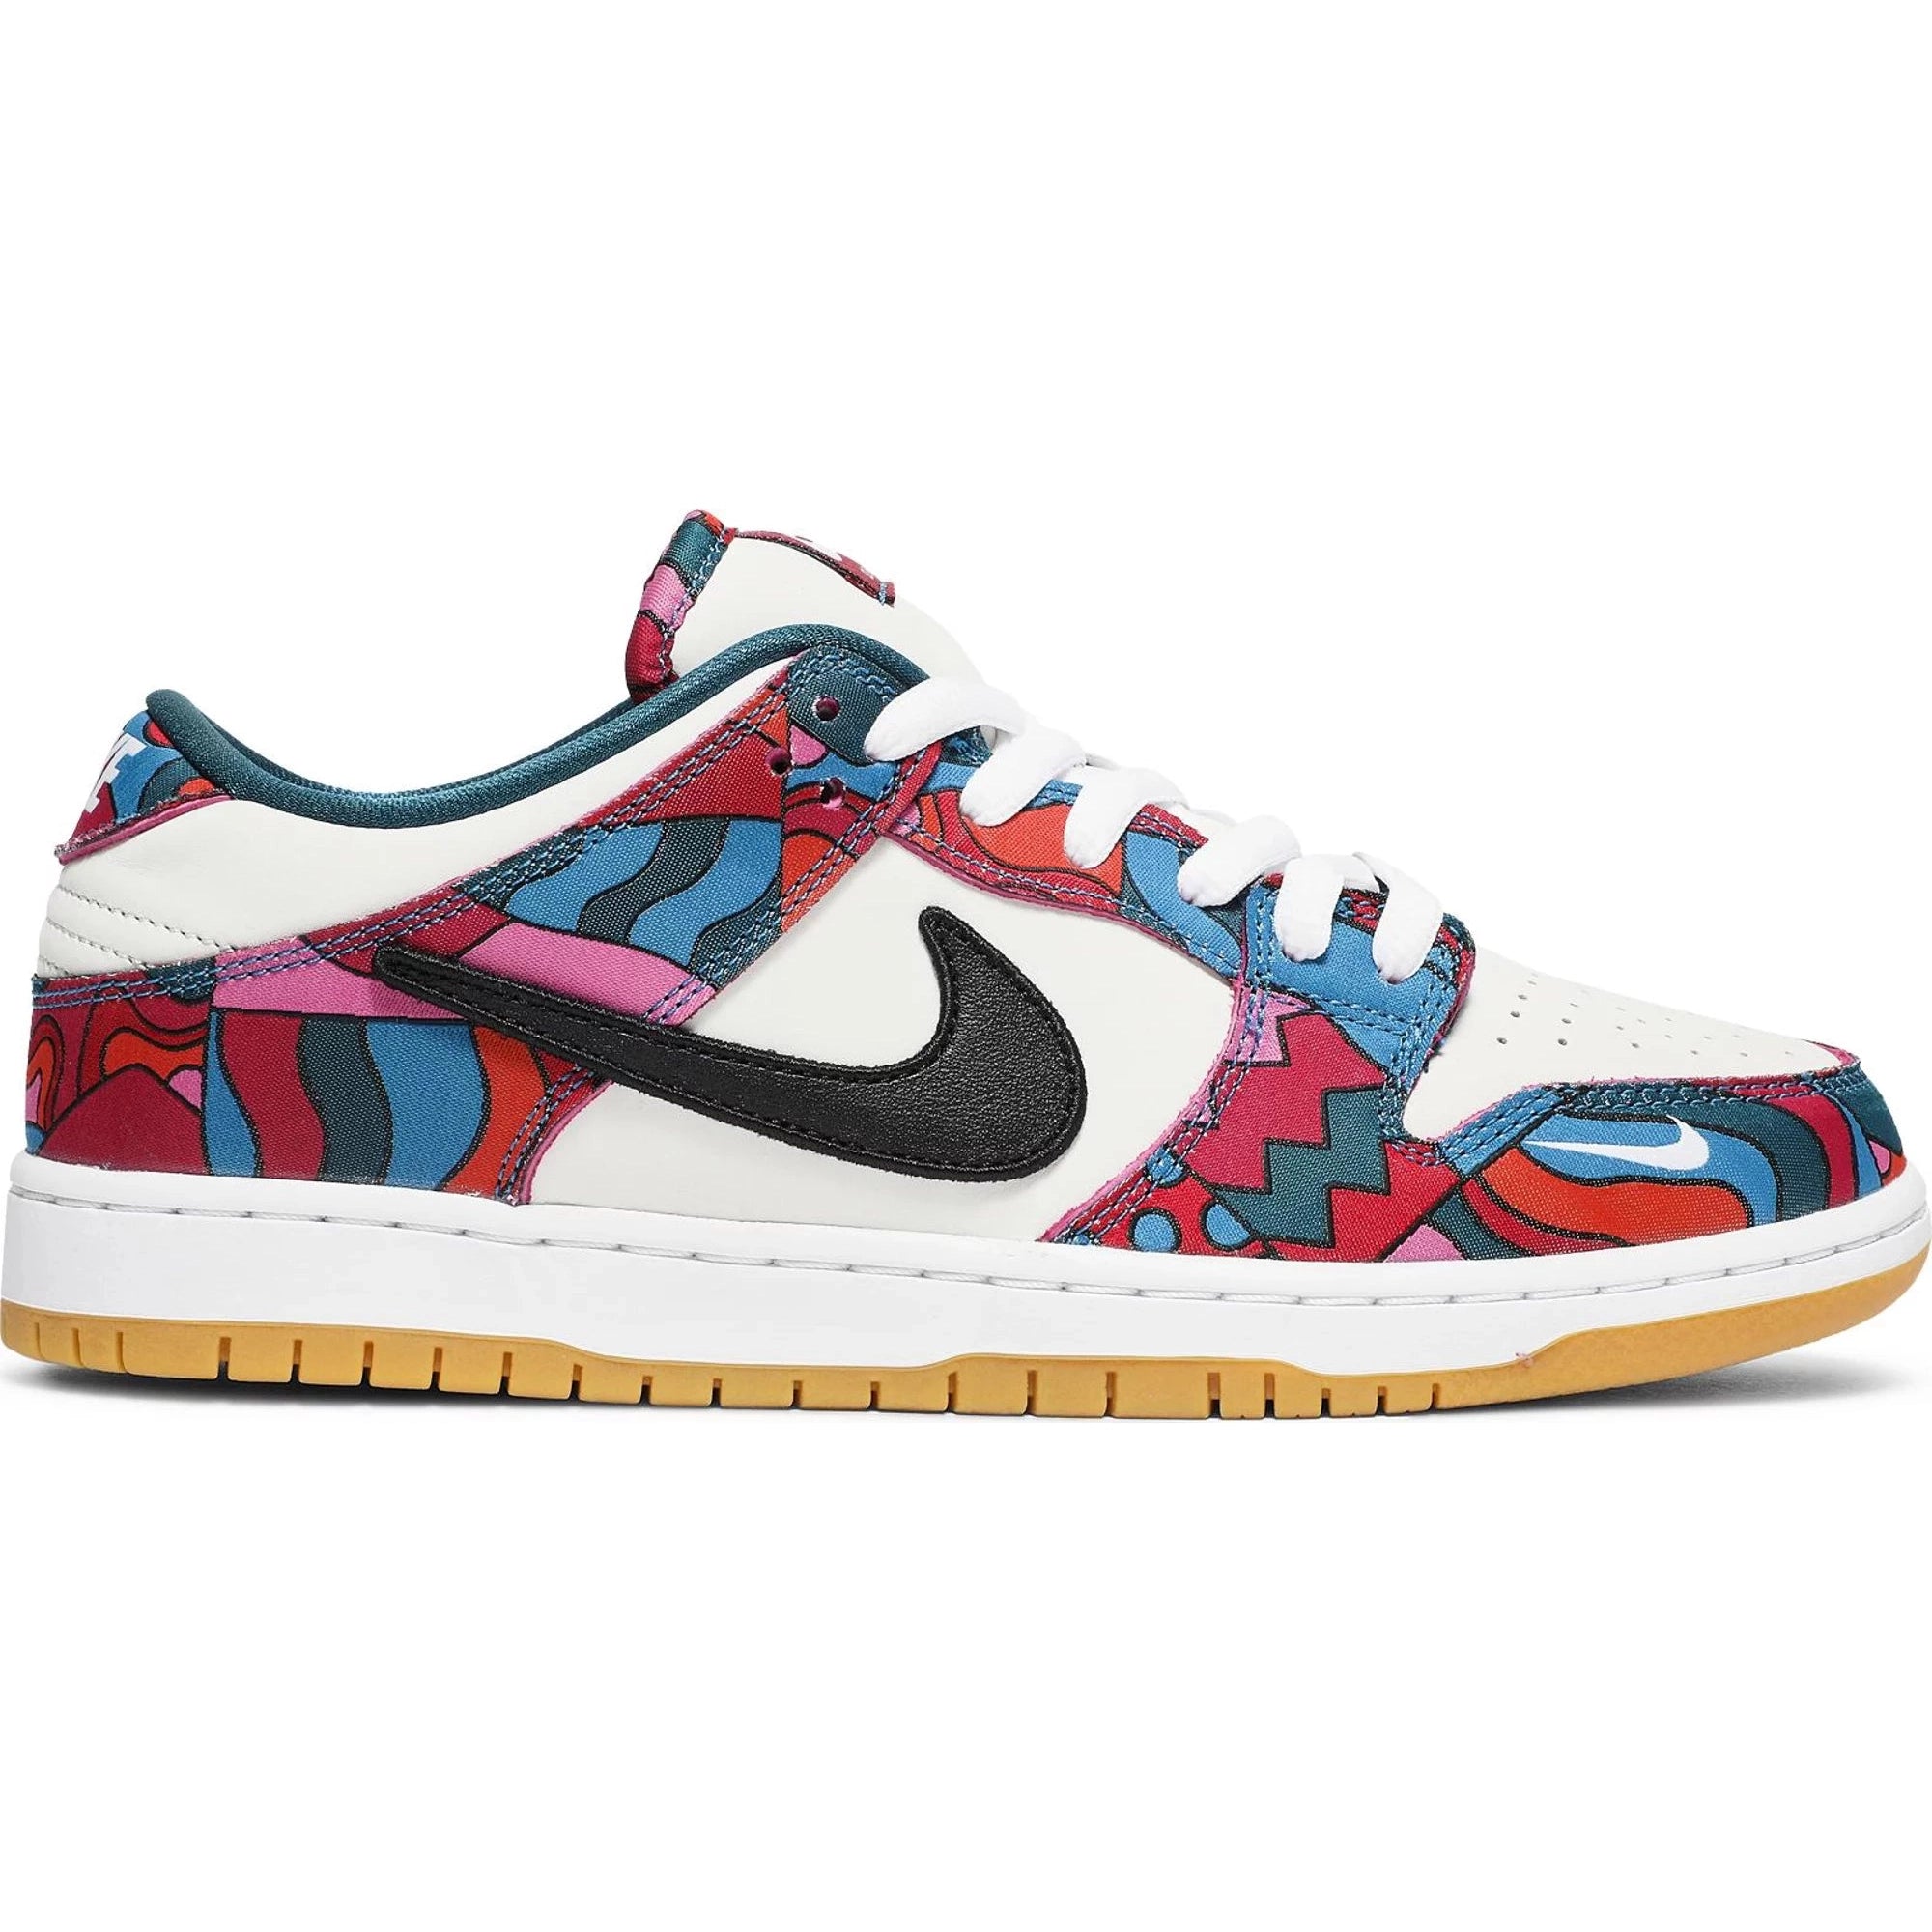 Parra x Dunk Low Pro SB 'Abstract Art' | Waves Never Die | Nike | Sneakers